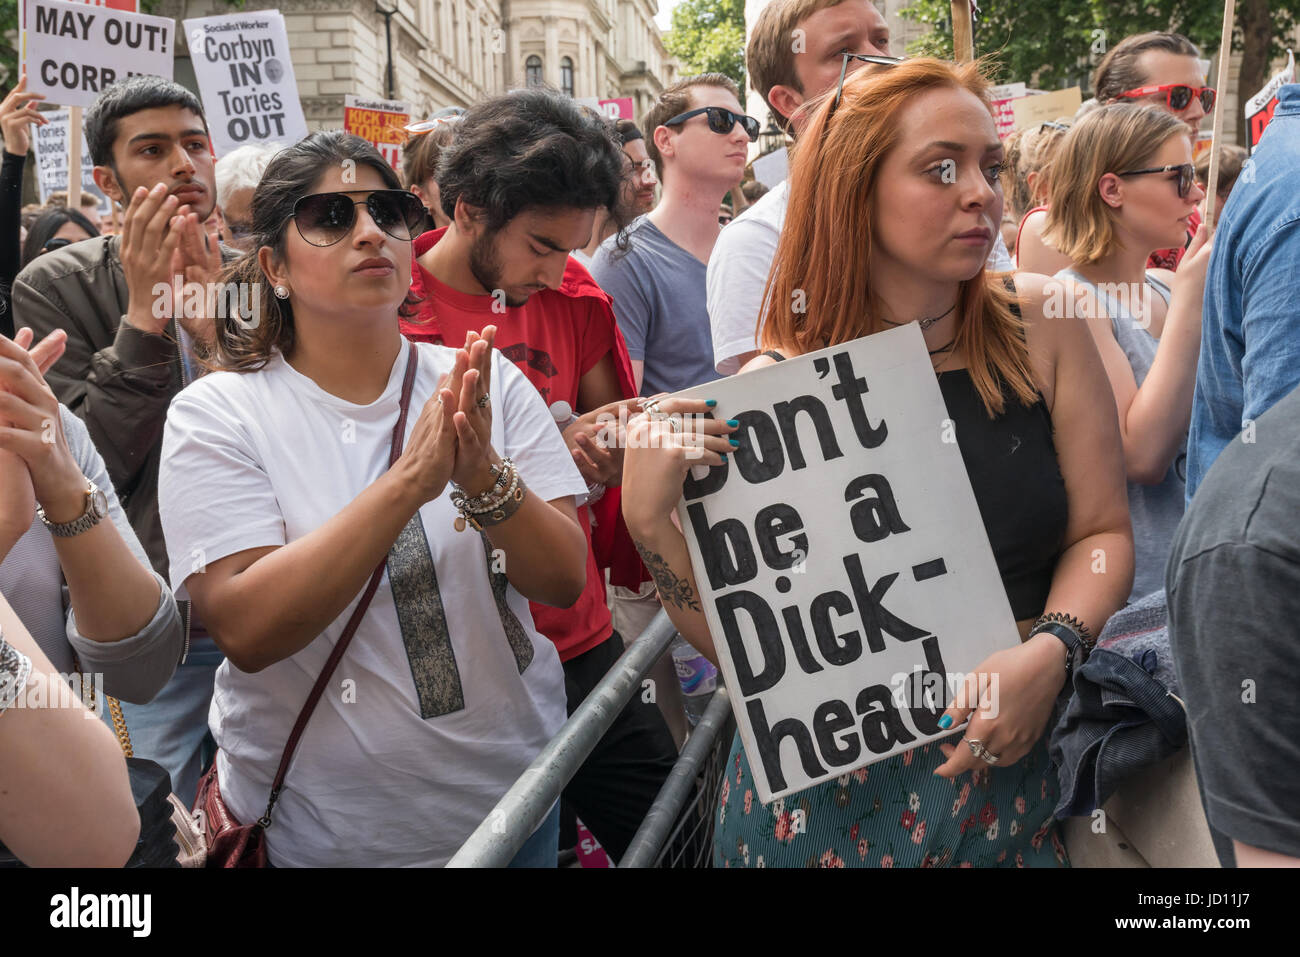 June 17, 2017 - London, UK - London, UK. 17th June, 2017. A protest at Downing St calls on Theresa May to resign. Mostly made up of vocal supporters of Jeremy Corbyn, buoyed up by the election results which showed him to be eminently electable, there were speeches by Labour MPs Marsha De Cordova who gained Battersea from the Conservatives, Rupa Huq who greatly increased her tiny majority and Shadow Education Secretary Angela Rayner. There were others who spoke about the DUP, as a party intrinsically linked with Protestant terrorist groups and dominated by a homophobic church which represents a Stock Photo